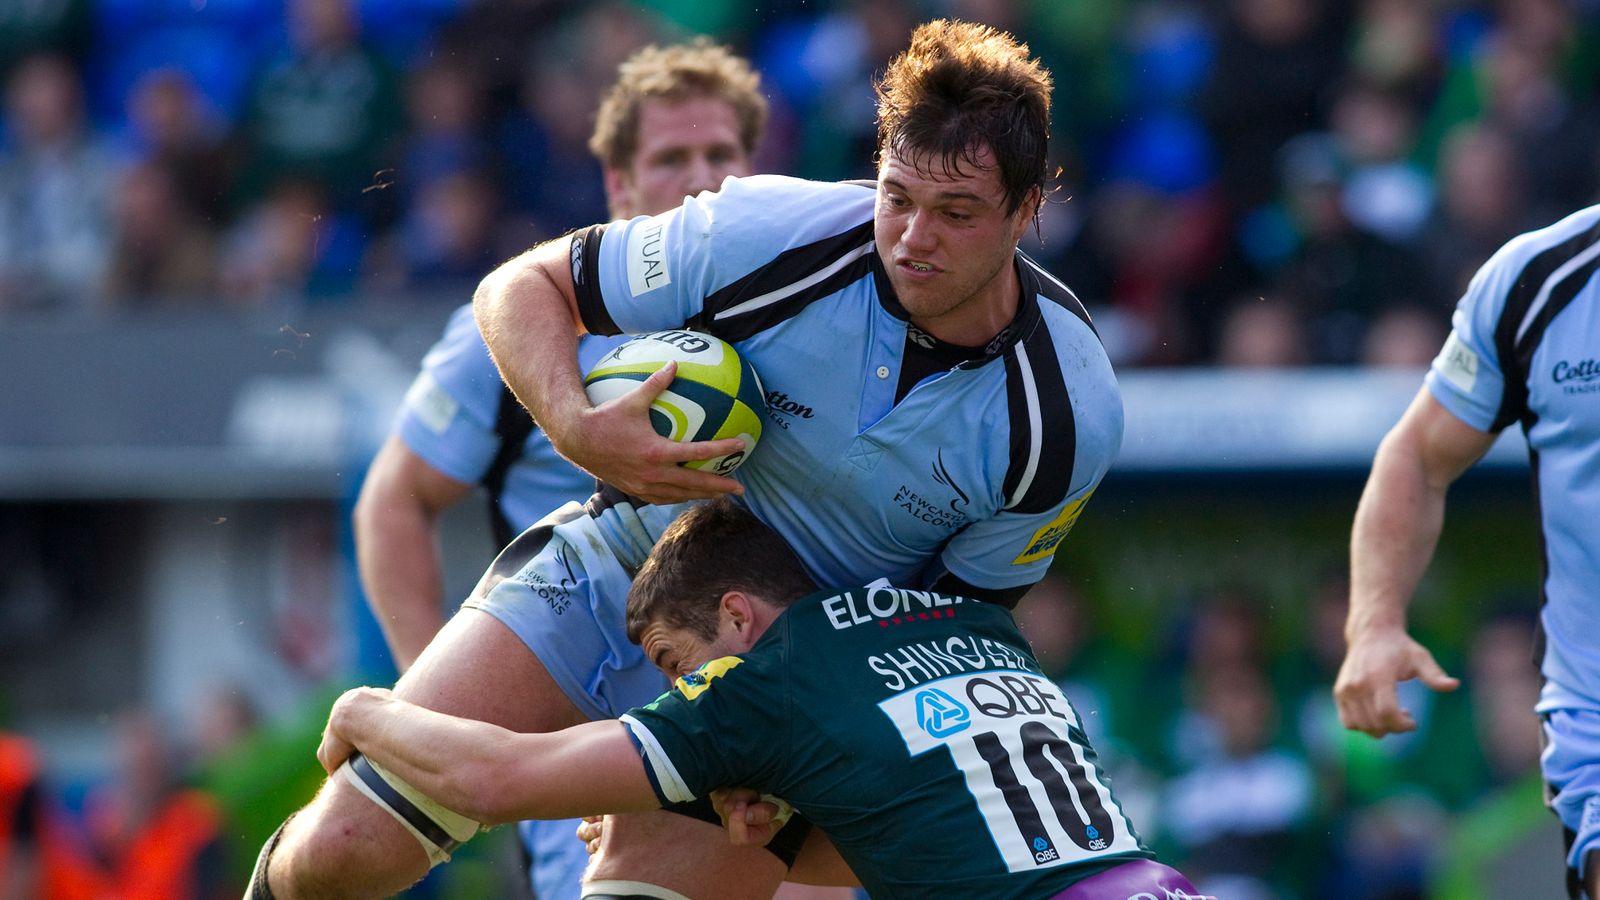 Gaston Cortes, Jack Tovey and Glen Townson commit to Bristol | Rugby ...